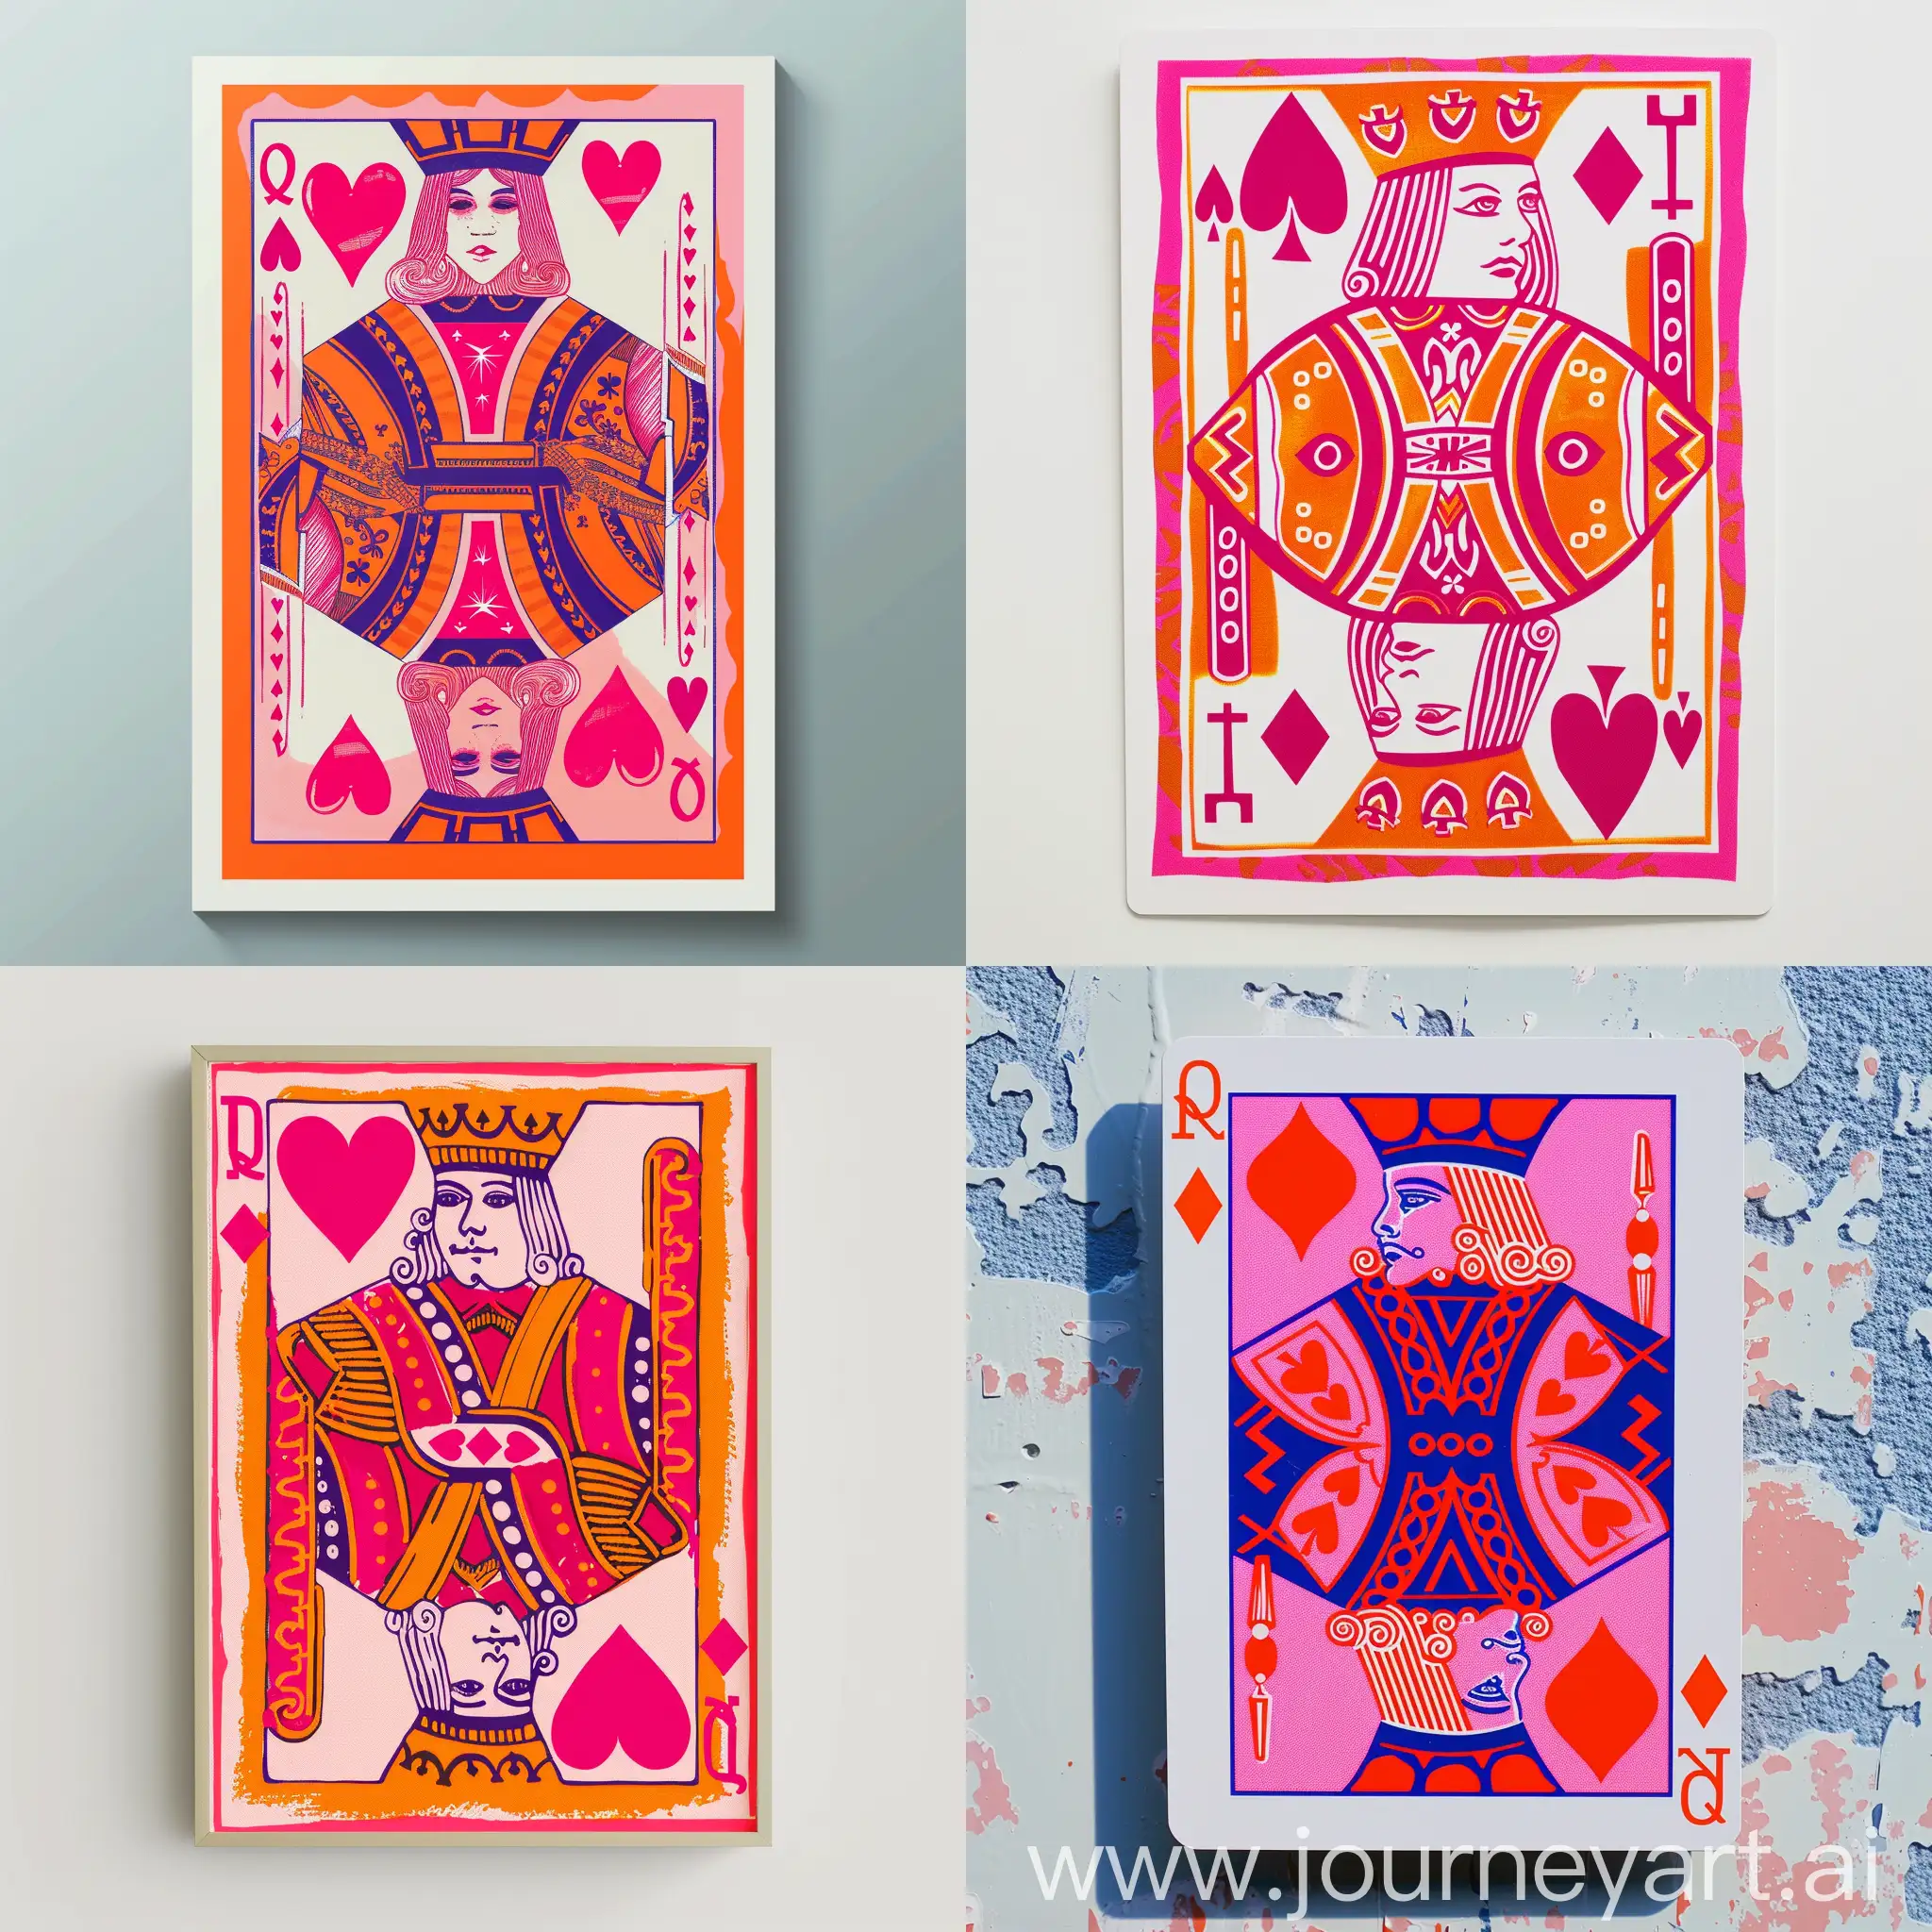 queen of hearts playing card funky wall art, pink and orange preppy wall art dorm decor, preppy y2k room decor aesthetic maximalist wall art